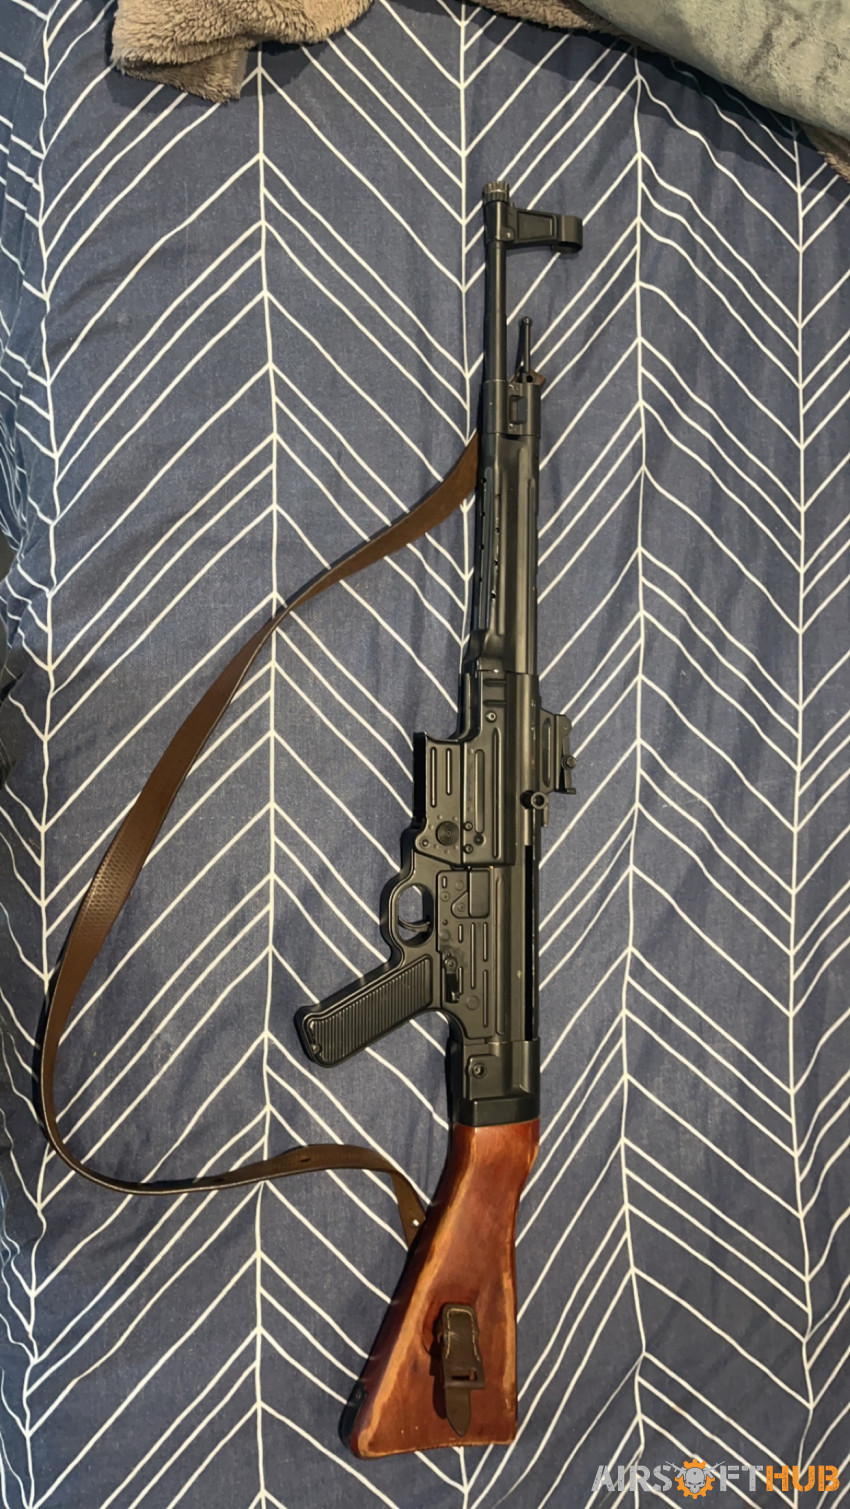 AGM STG44 - Used airsoft equipment